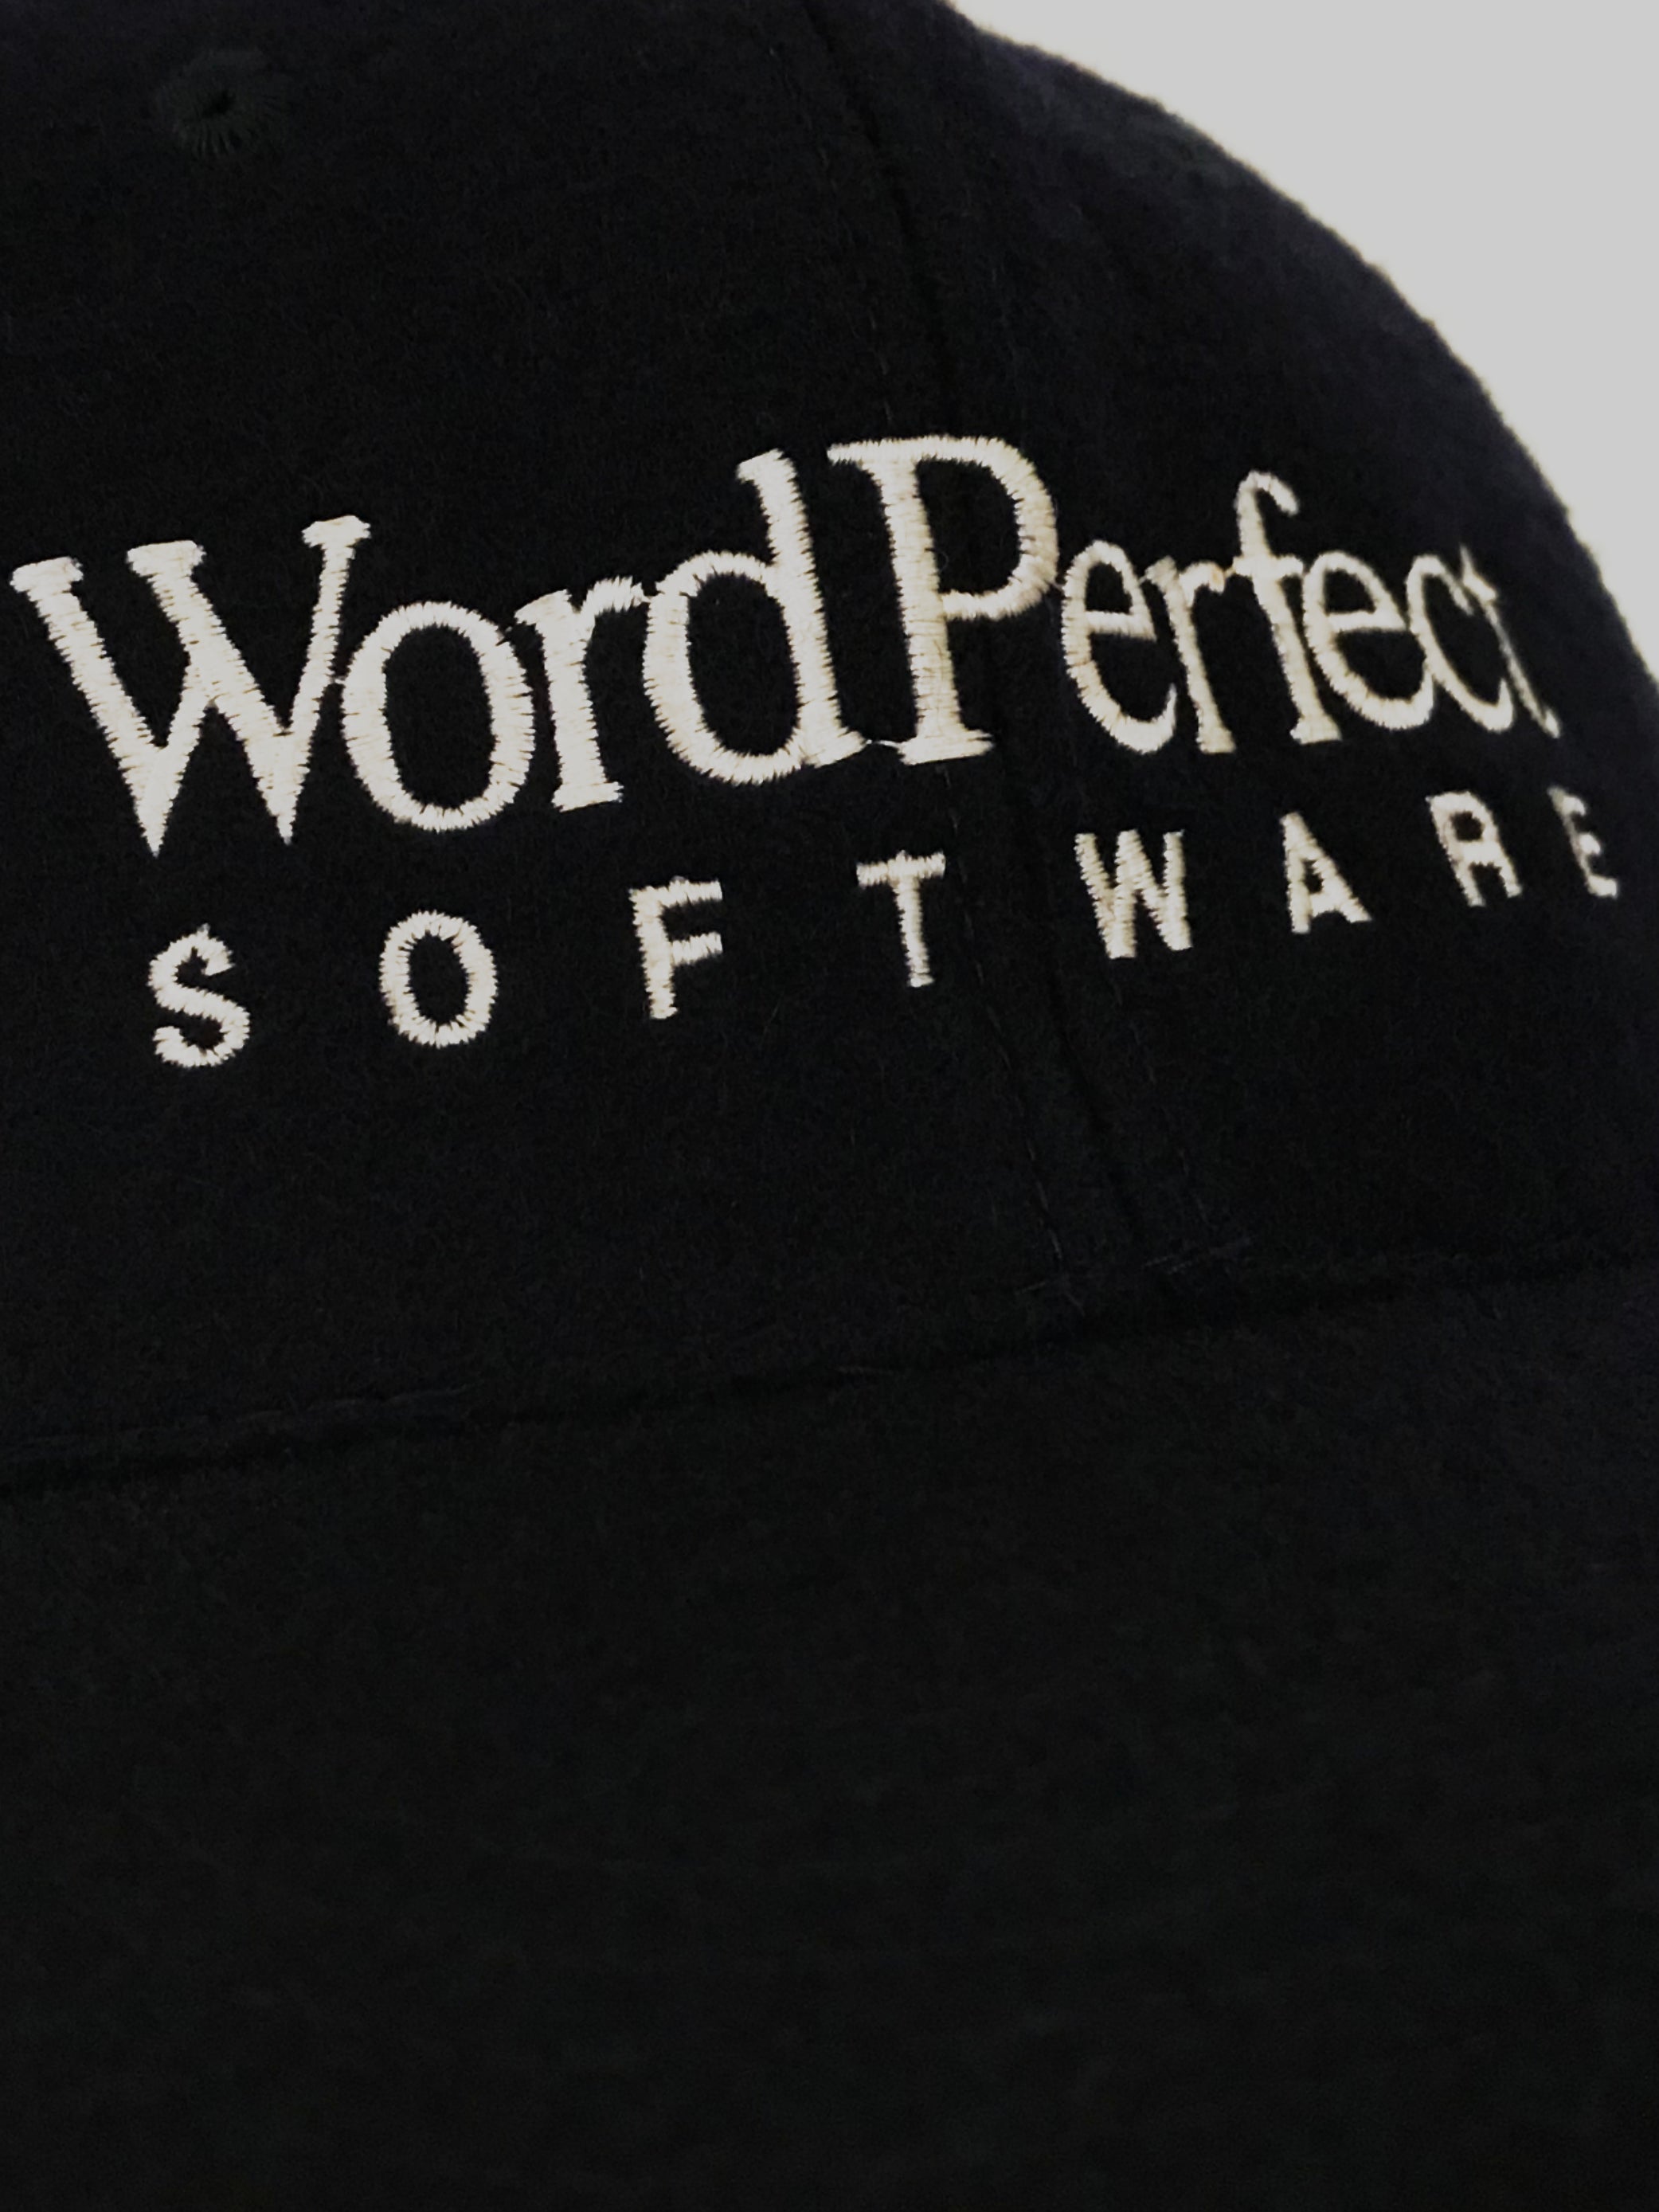 Word perfect Software